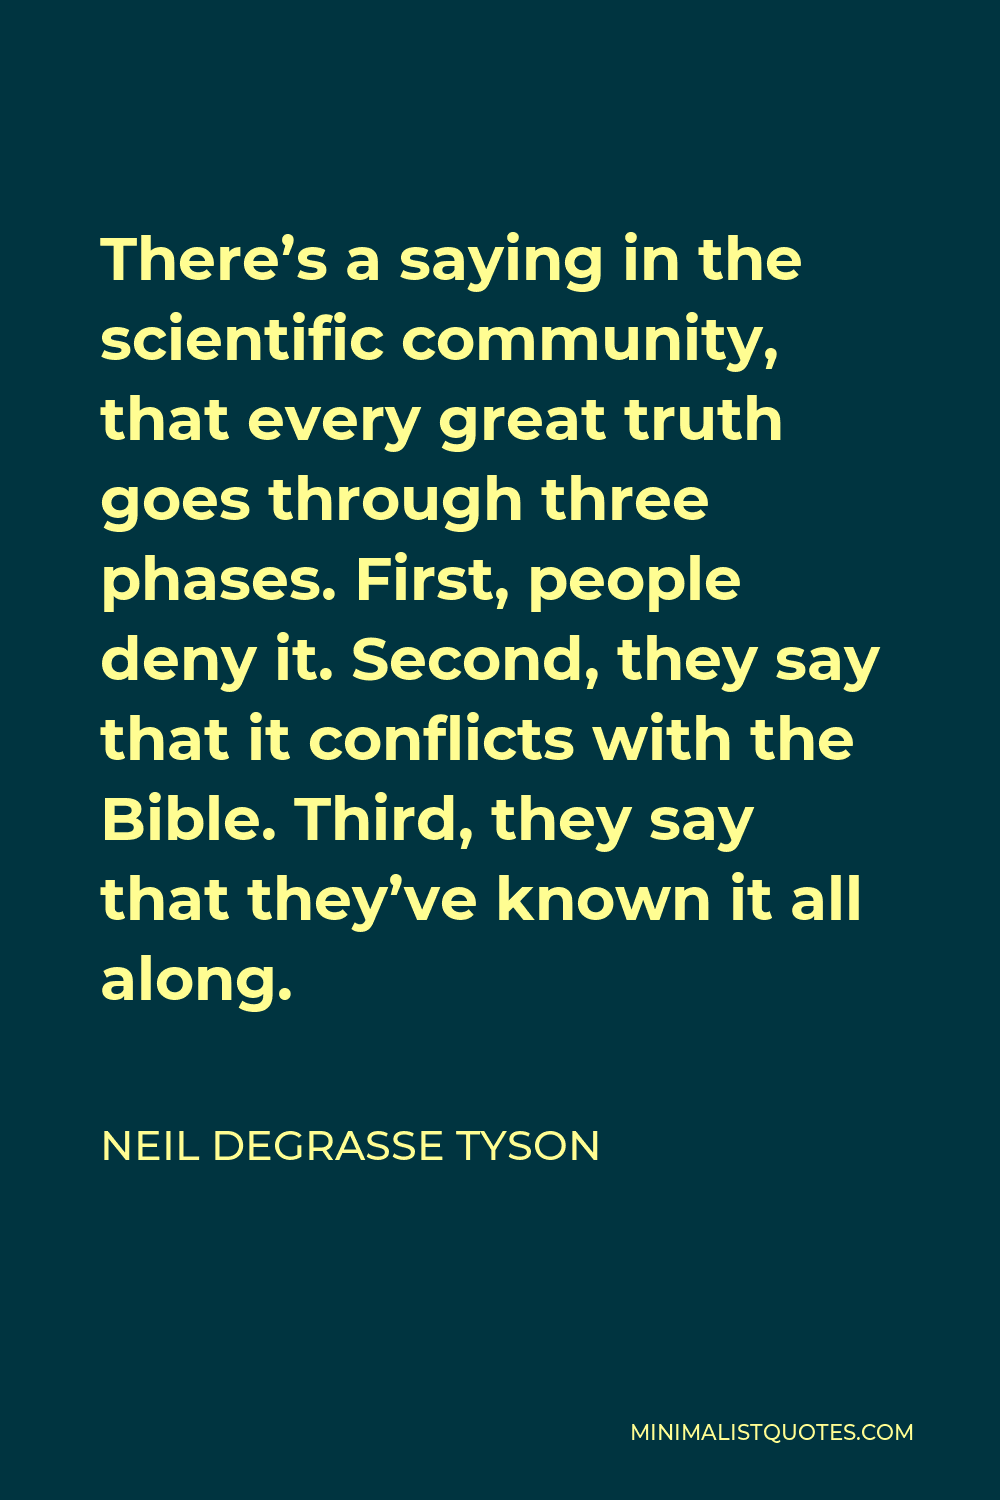 Neil deGrasse Tyson Quote - There’s a saying in the scientific community, that every great truth goes through three phases. First, people deny it. Second, they say that it conflicts with the Bible. Third, they say that they’ve known it all along.